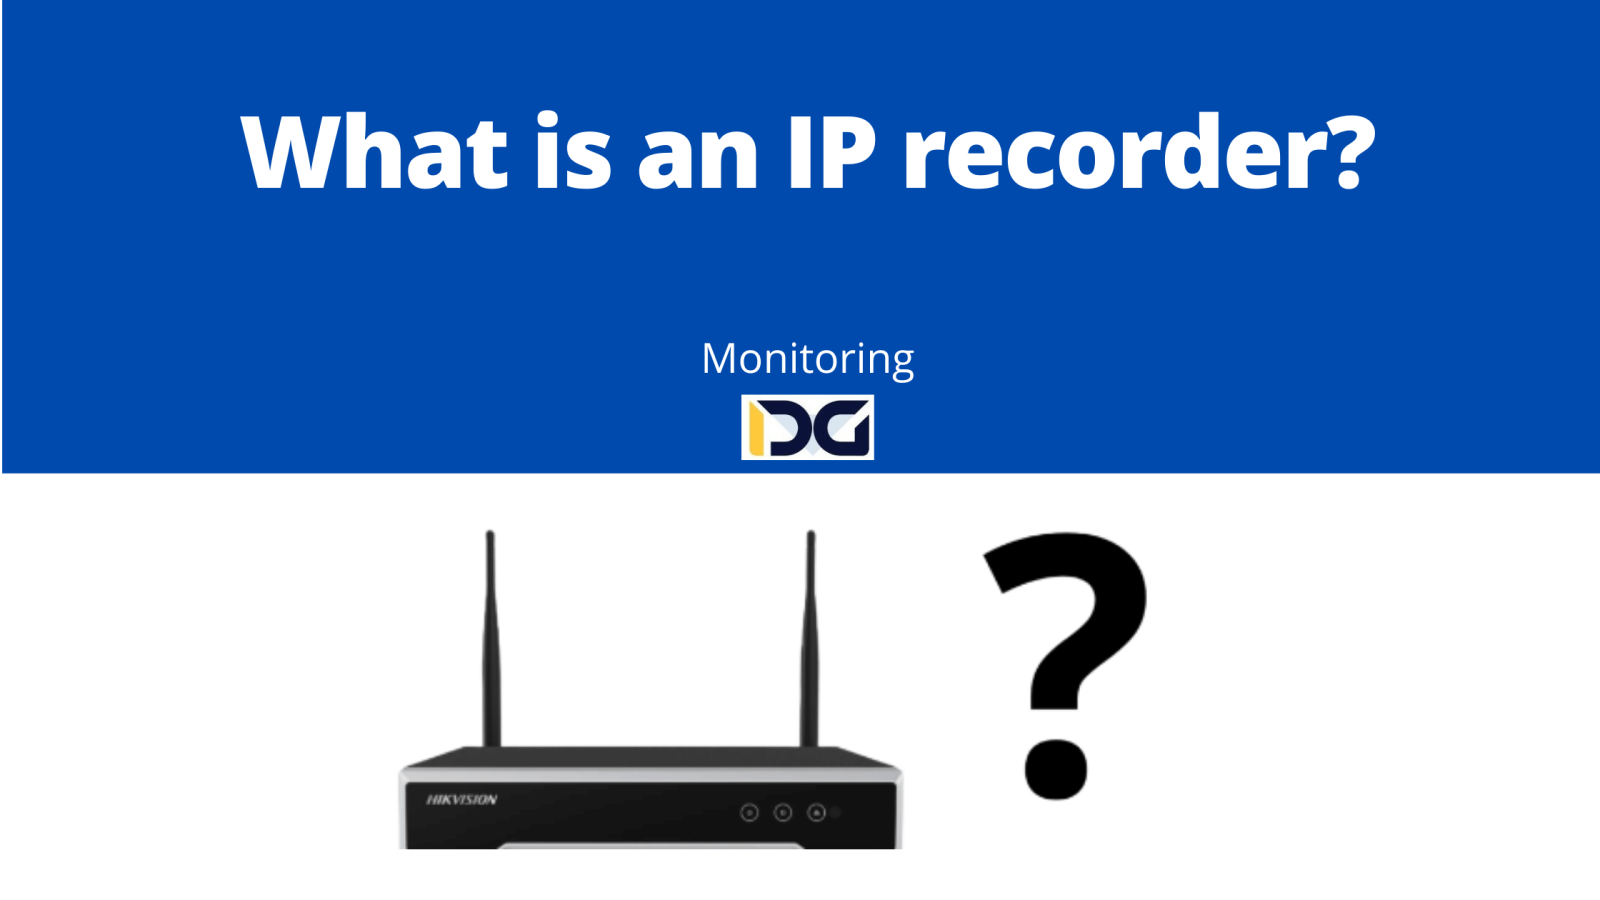 What is an IP recorder?